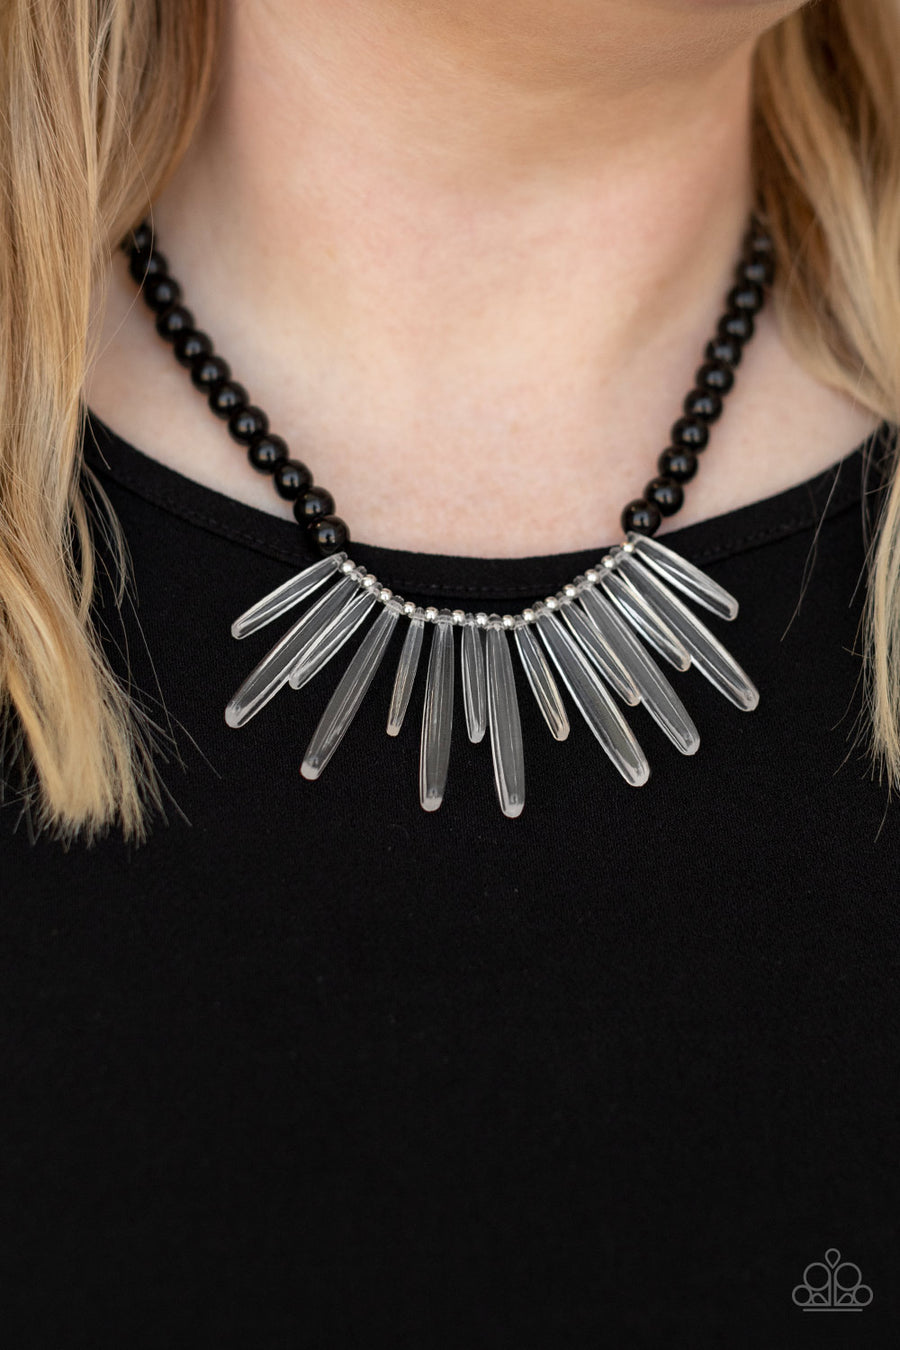 Icy Intimidation - Black Beaded Necklaces acrylic icicles drip from the center of a strand of black beads, creating an intensely icy fringe below the collar. Features an adjustable clasp closure.  Sold as one individual necklace. Includes one pair of matching earrings.